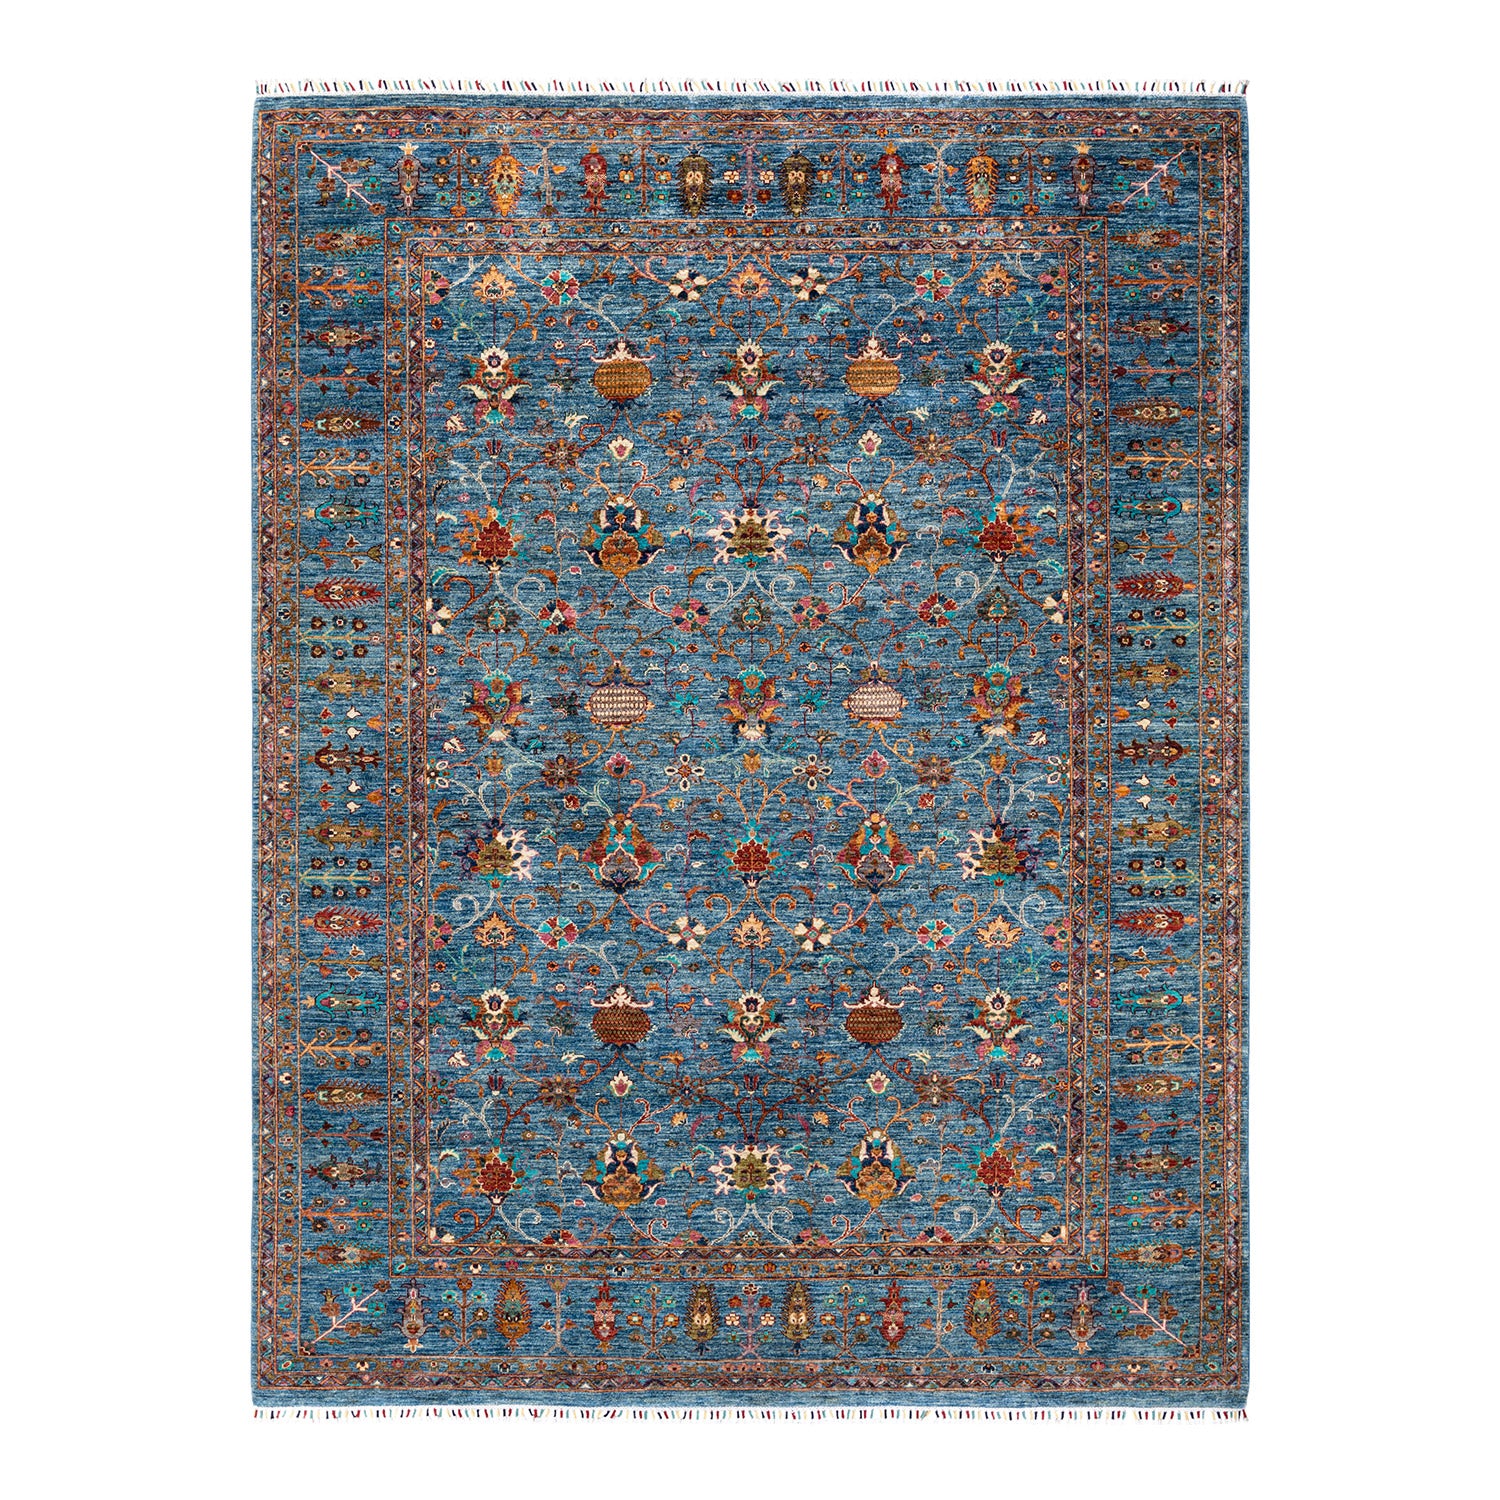 Tribal, One-of-a-Kind Hand-Knotted Runner Rug - Blue, 8' 10" x 11' 9" Default Title